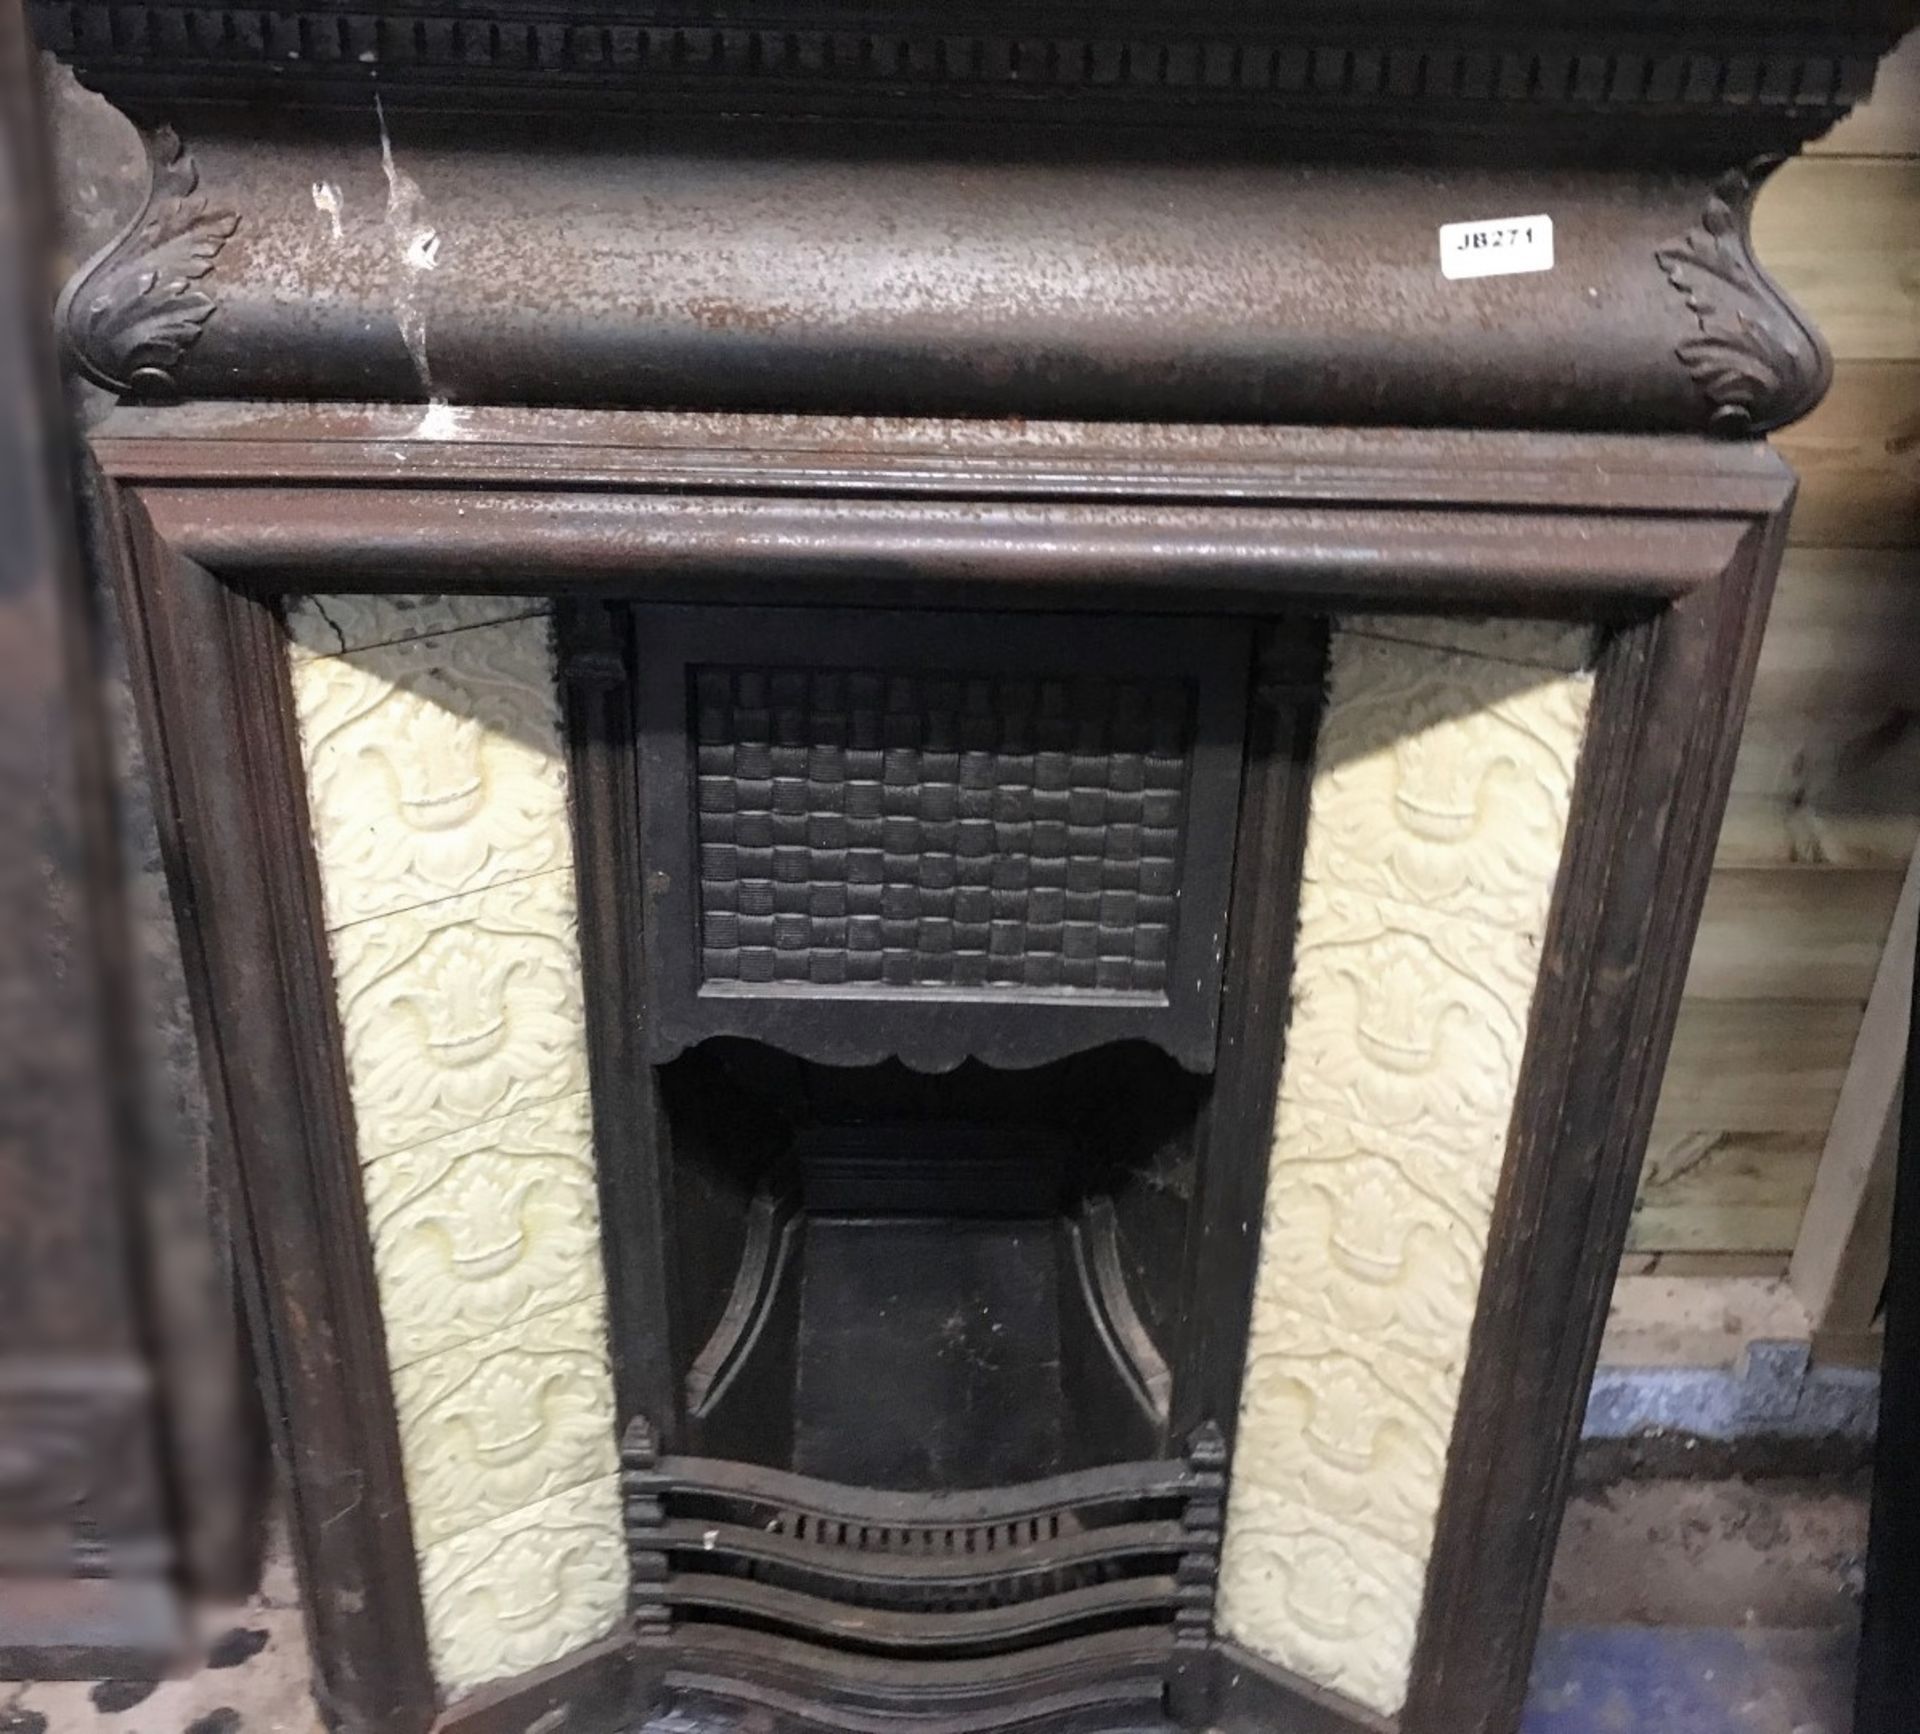 1 x Stunning Antique Victorian Cast Iron Fire Surround With Ornate Insert And Tiled Sides - - Image 7 of 8